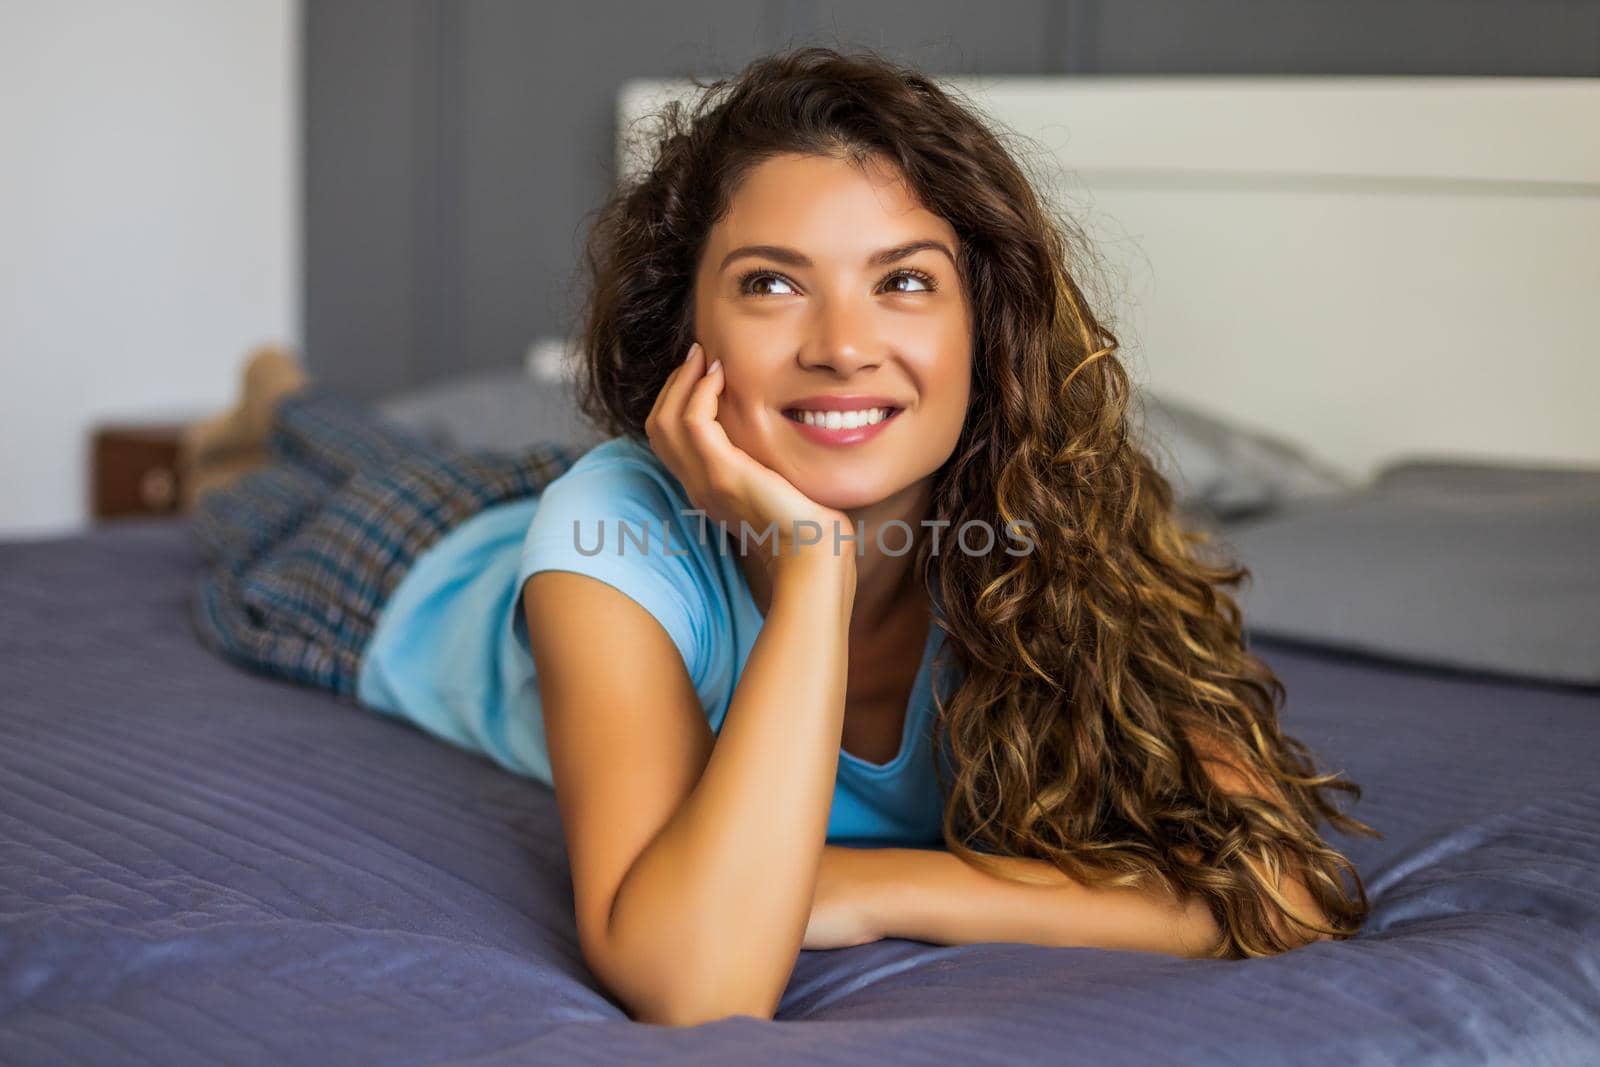 Portrait of happy woman lying on bed.